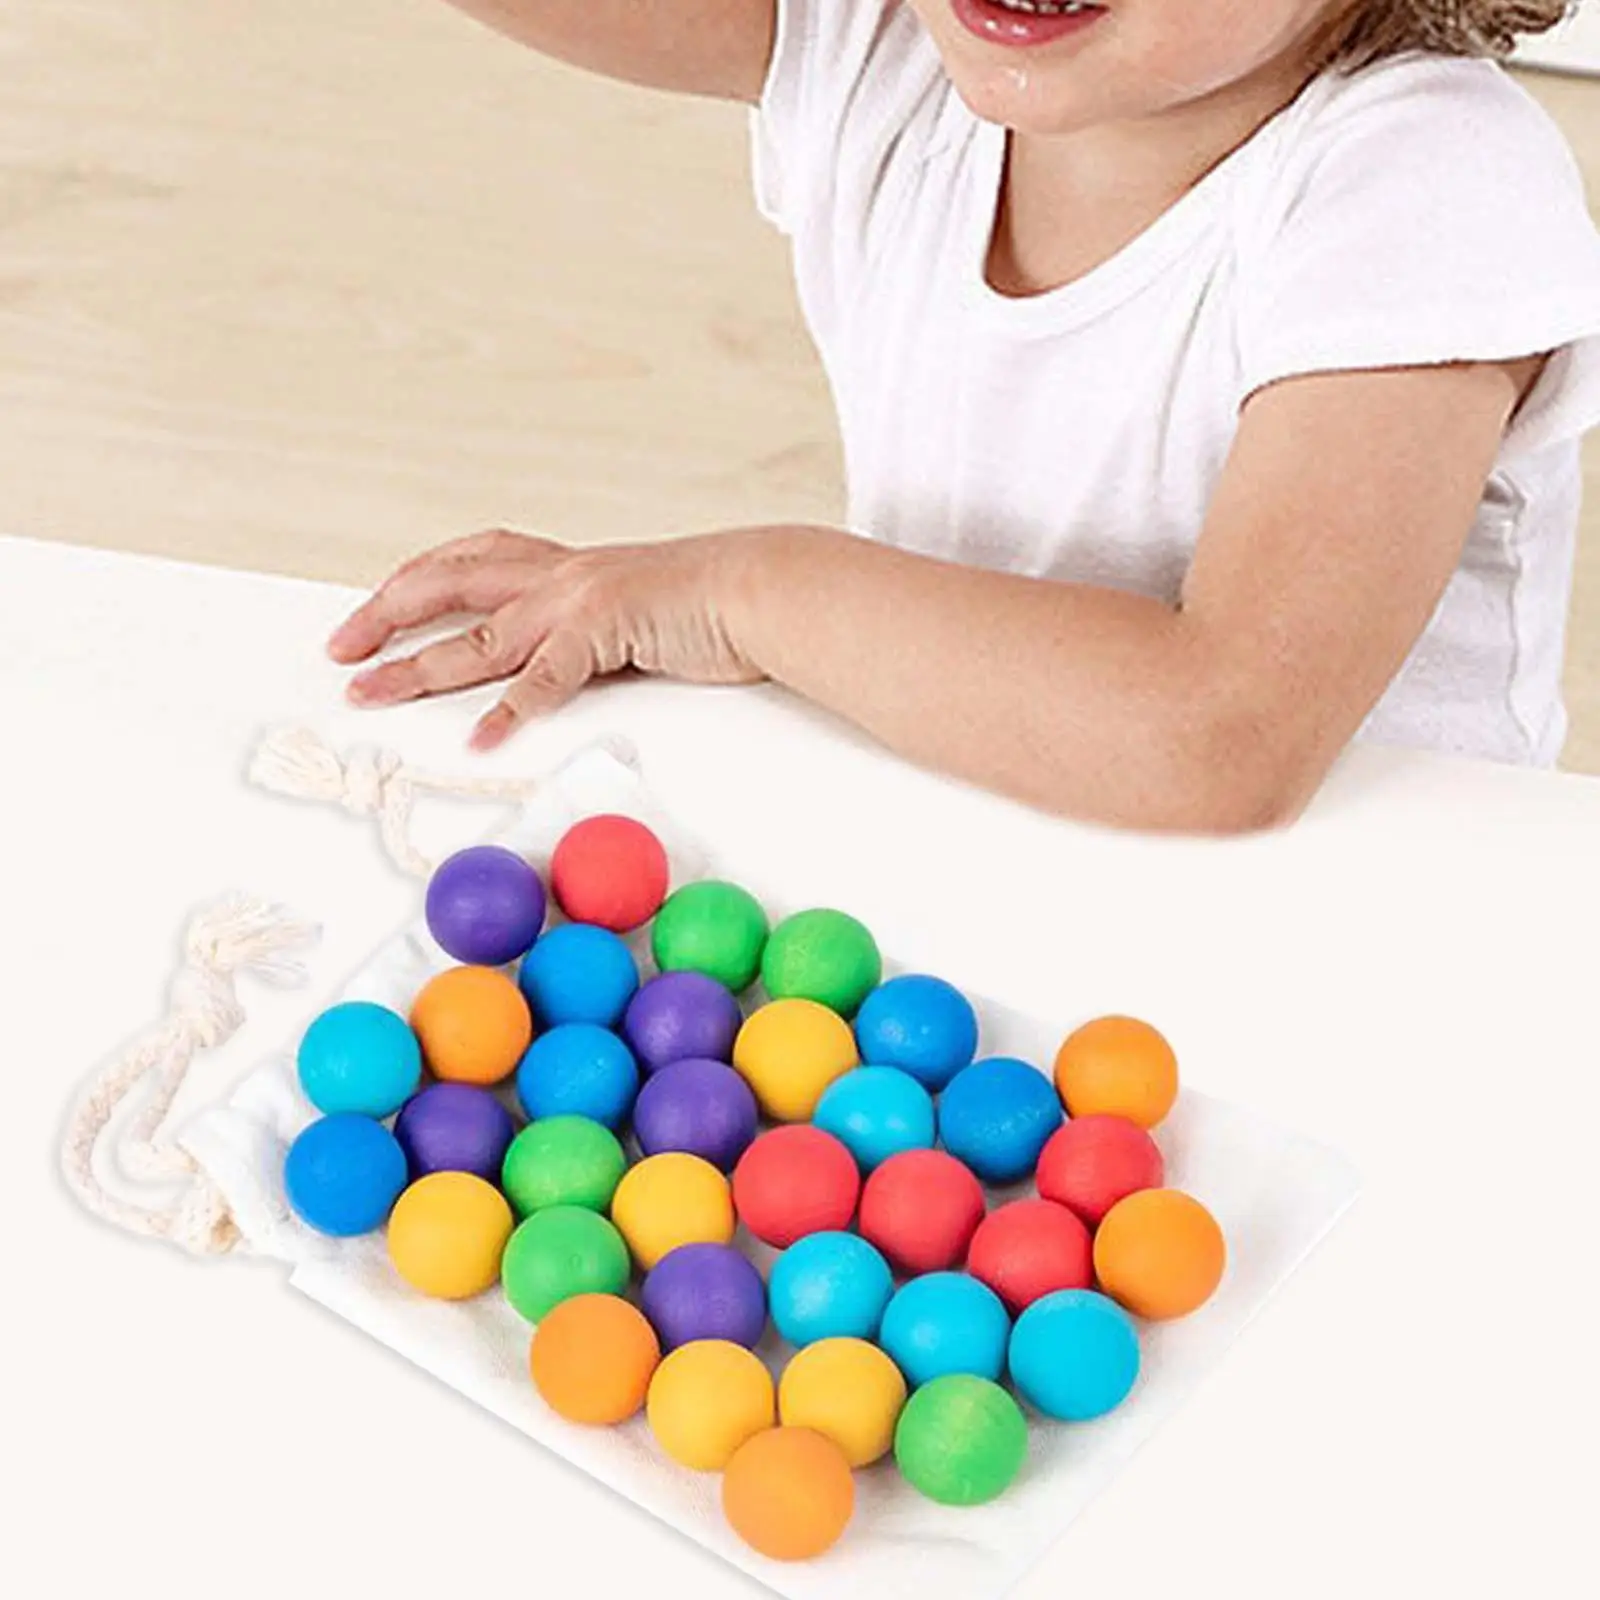 35 Pieces Montessori Multicolored Ball Set Inspire Curiosity Early Educational Toys Color Sorting Toys for Girls Age 3 4 5 6